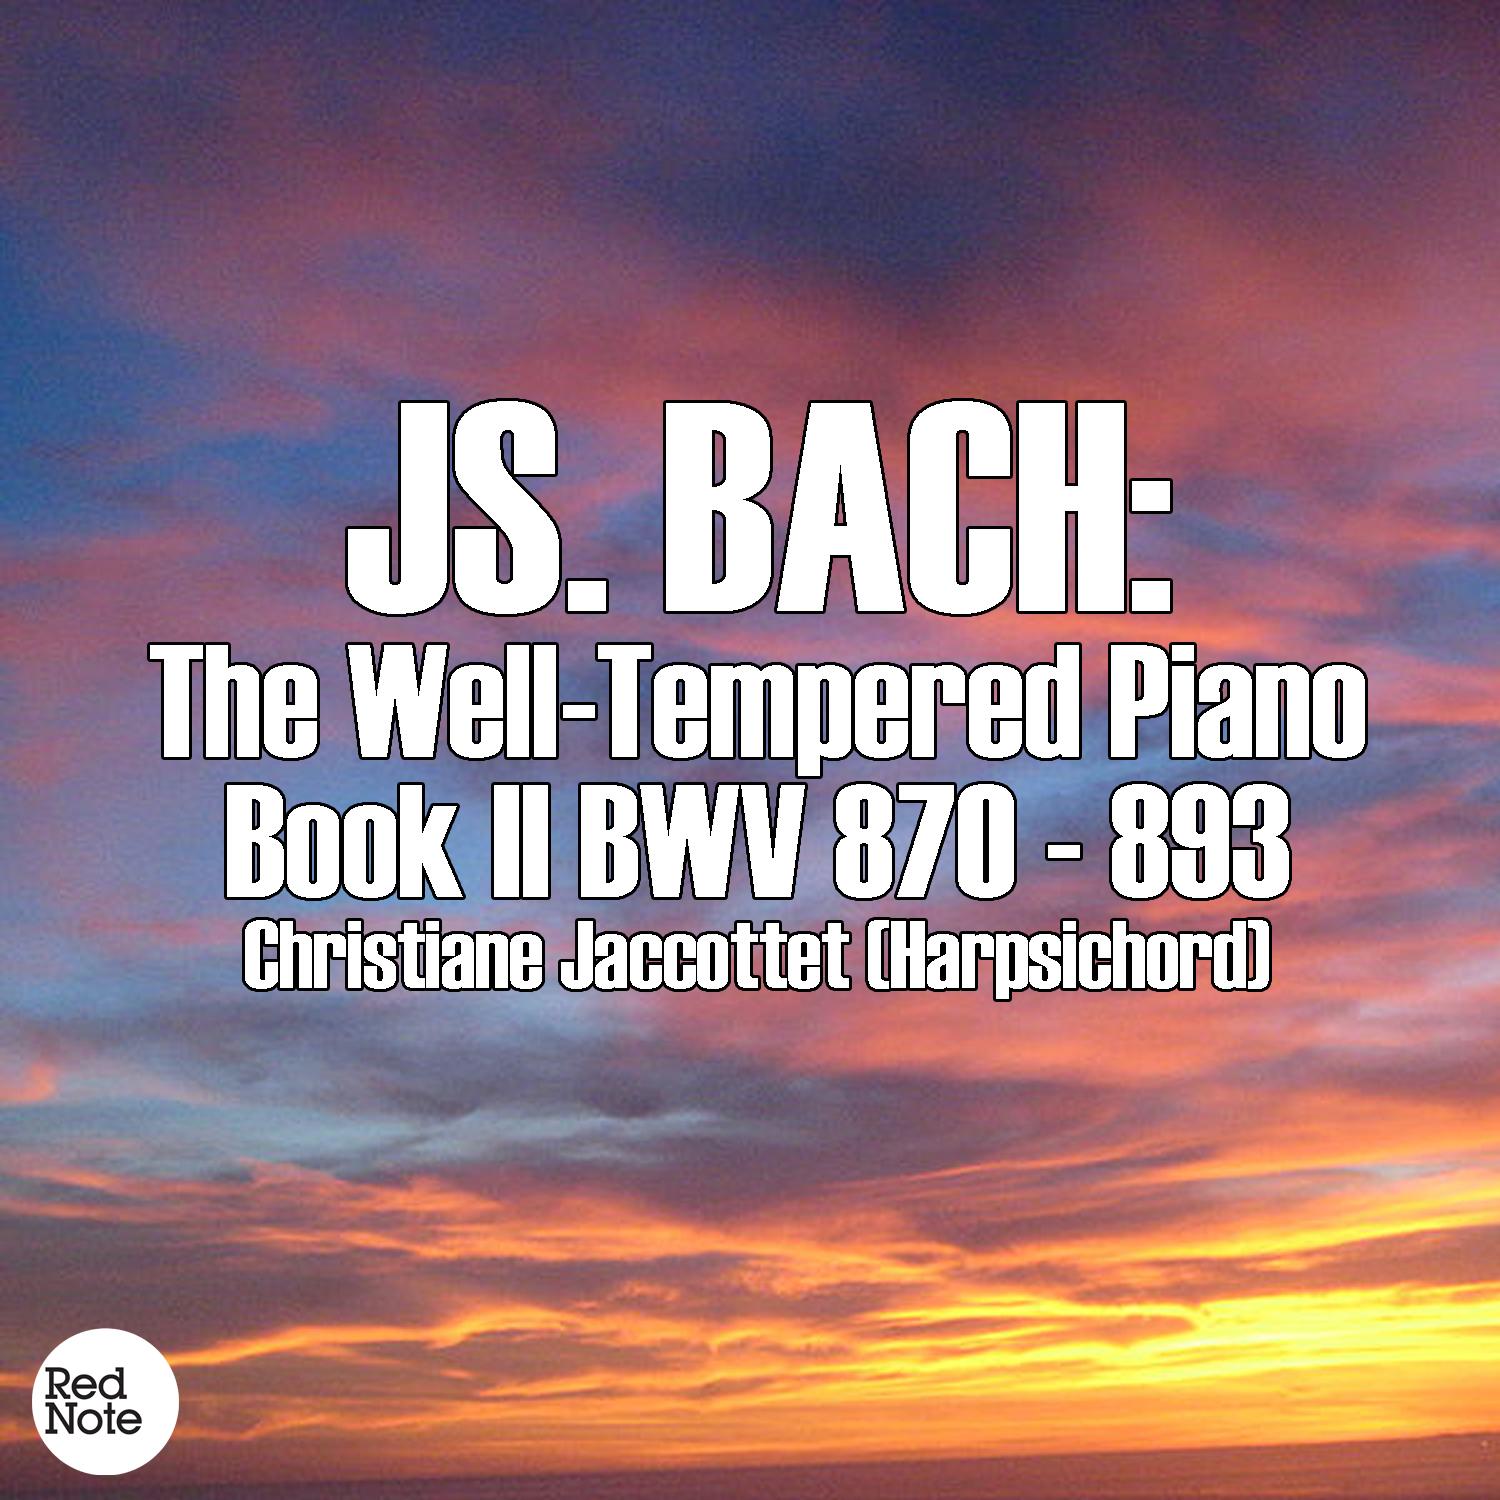 The Well-Tempered Clavier Book 2 in D Minor, BWV 875: Prelude and Fugue No. 6